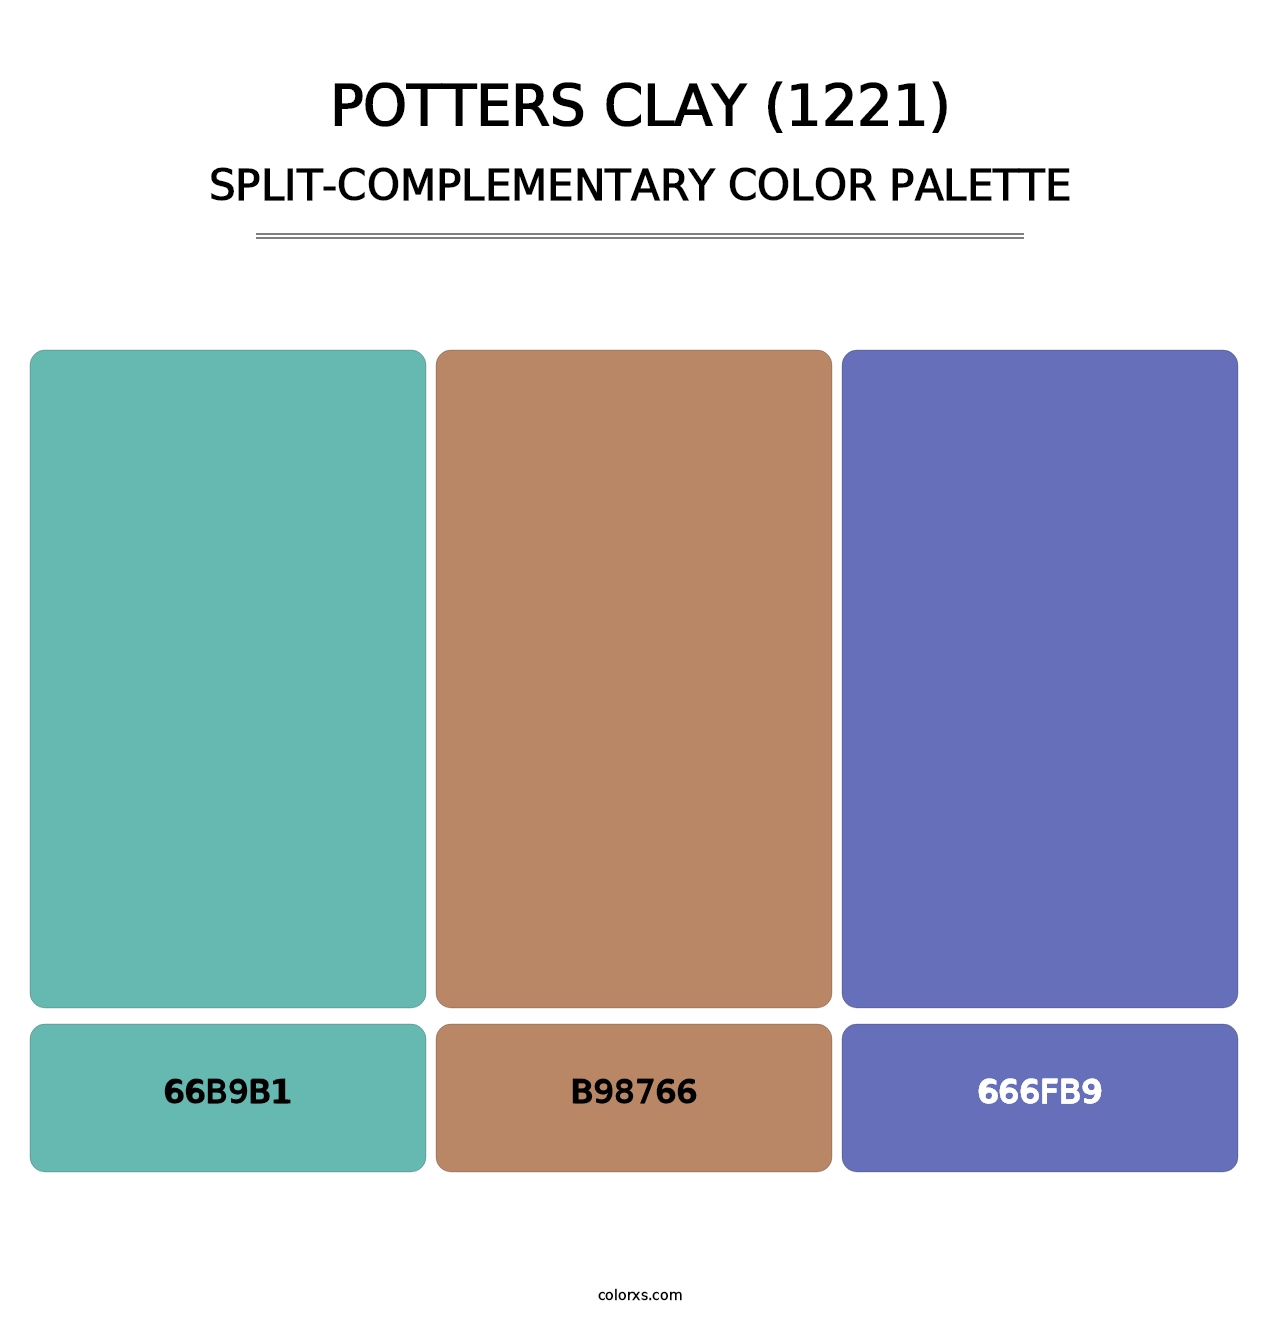 Potters Clay (1221) - Split-Complementary Color Palette